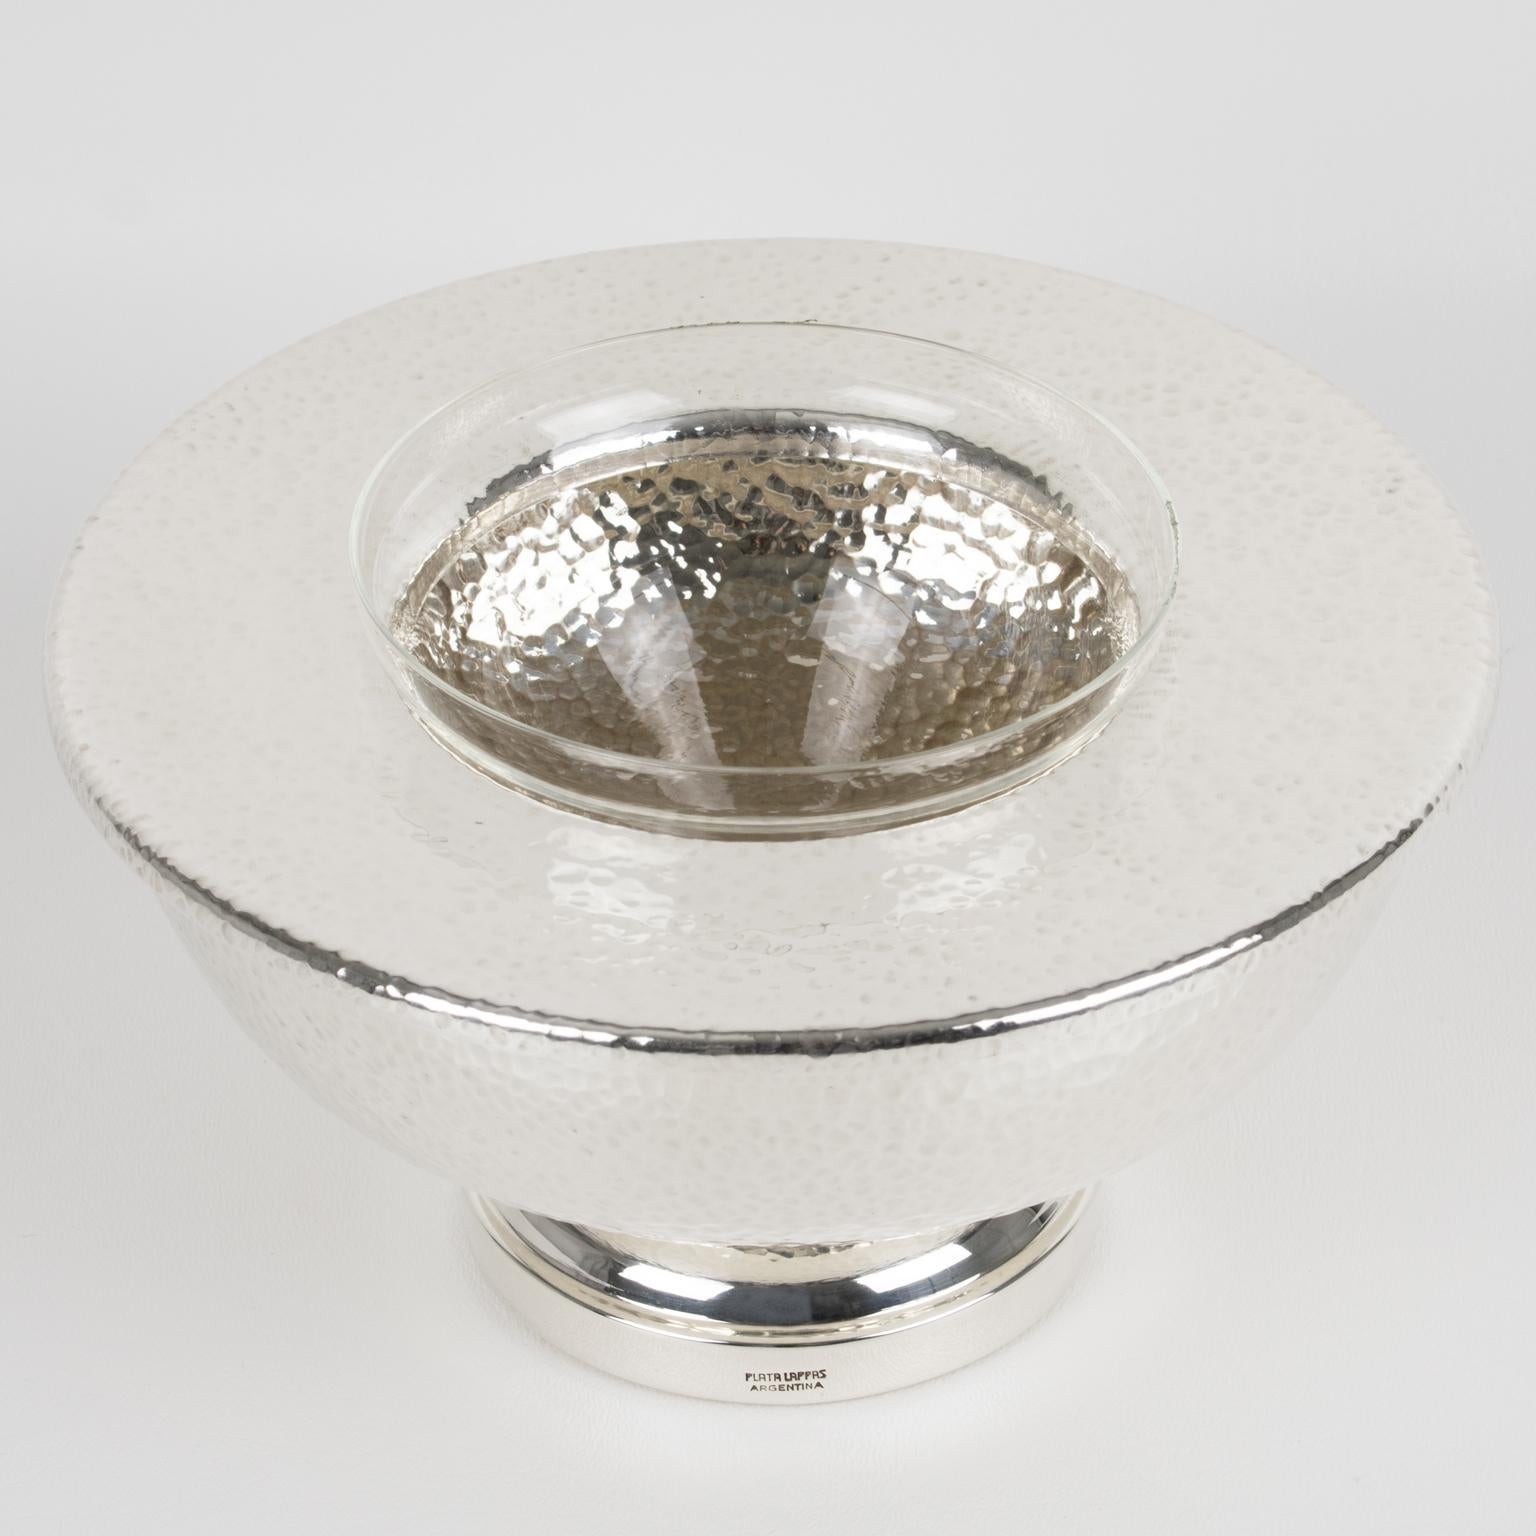 A modernist silver plate and crystal caviar serving bowl, dish, or chiller designed by Argentina silversmith Plata Lappas in the 1980s. The sophisticated design has a streamlined shape and features a rounded silver-plated metal ice container with a